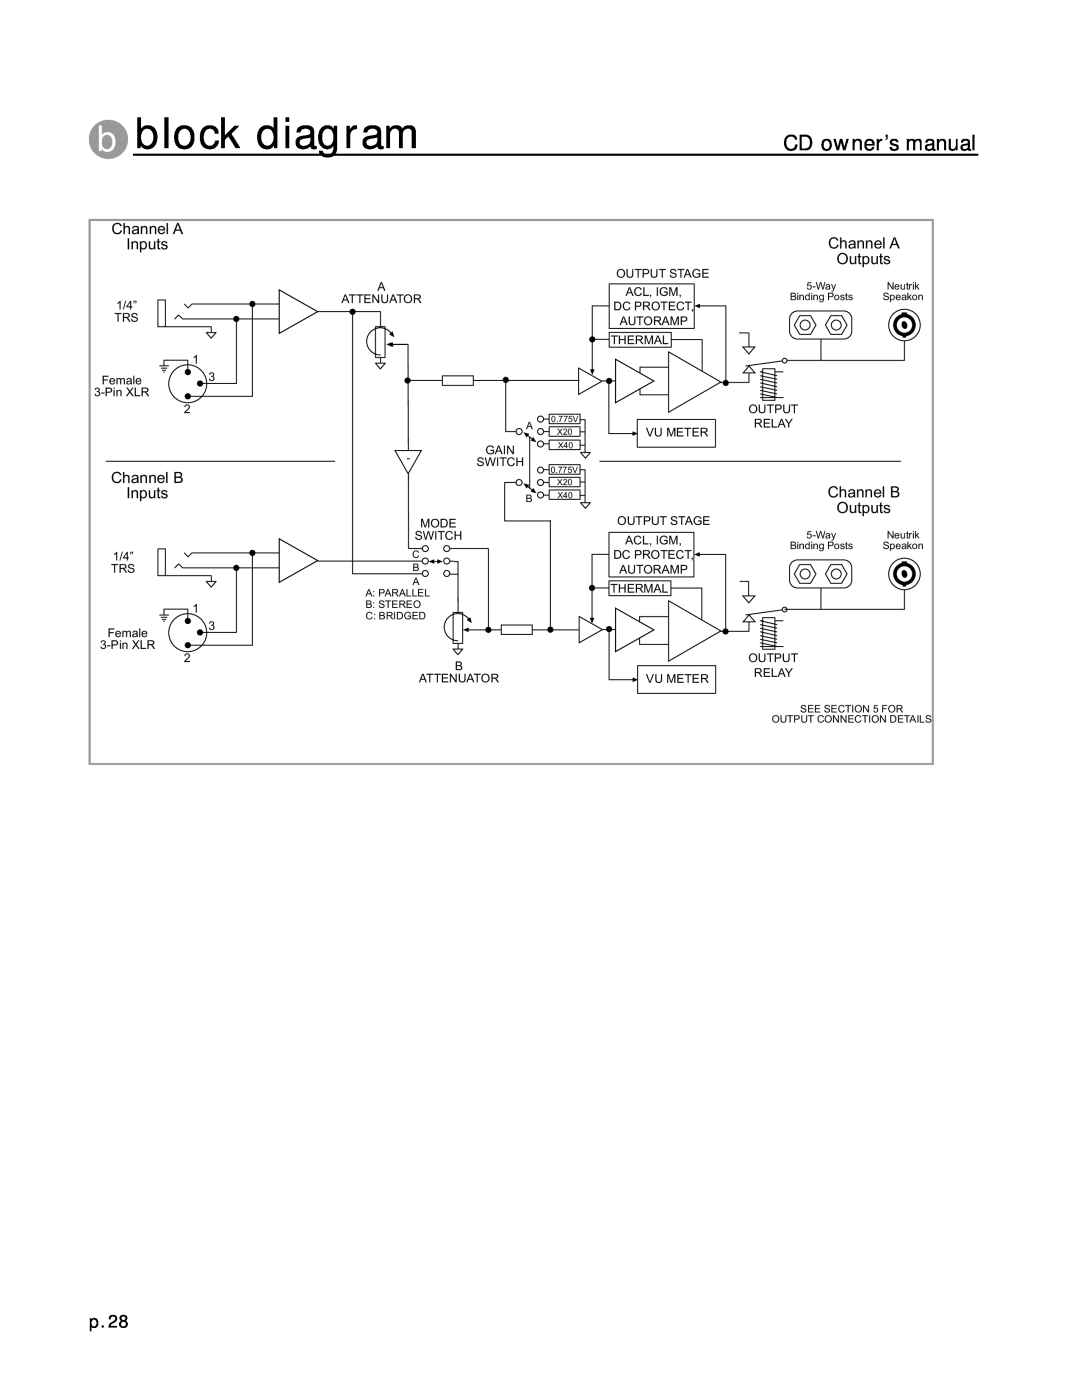 Peavey CD Series owner manual b block diagram, p.28, Channel A, Outputs, Channel B 